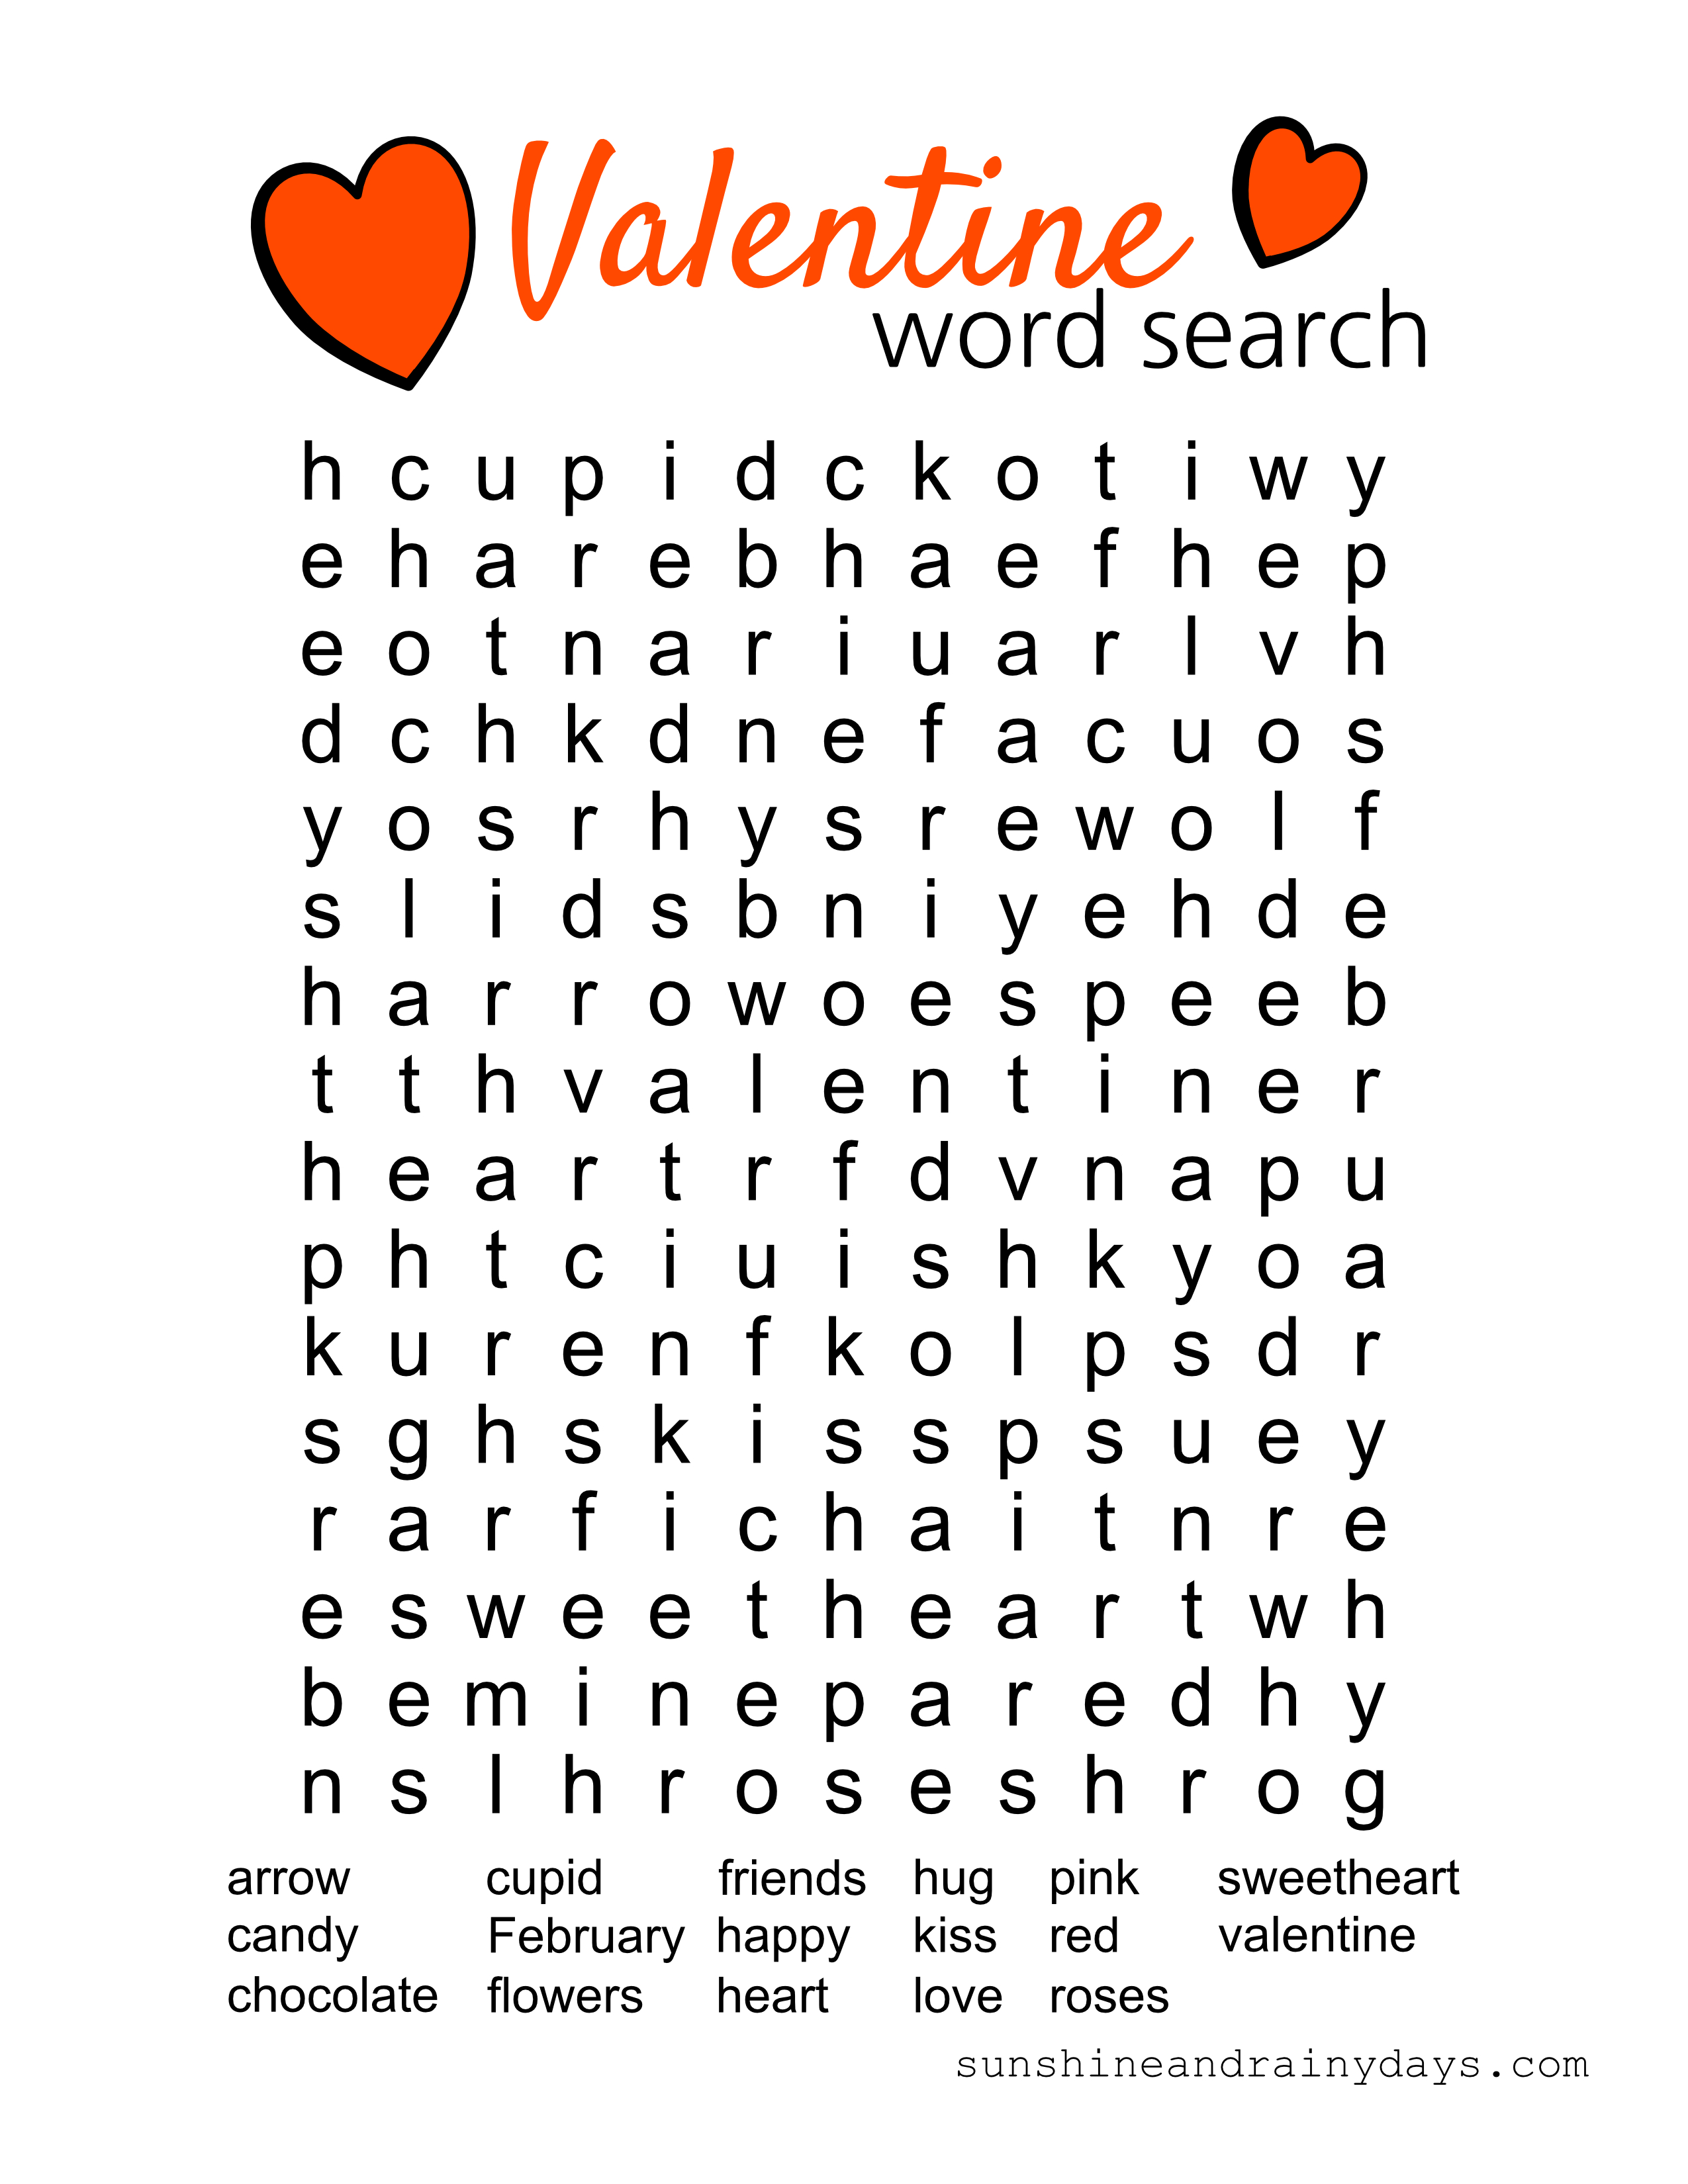 Valentine Word Search Printable - Sunshine And Rainy Days - Free Printable Valentine Word Search For Adults